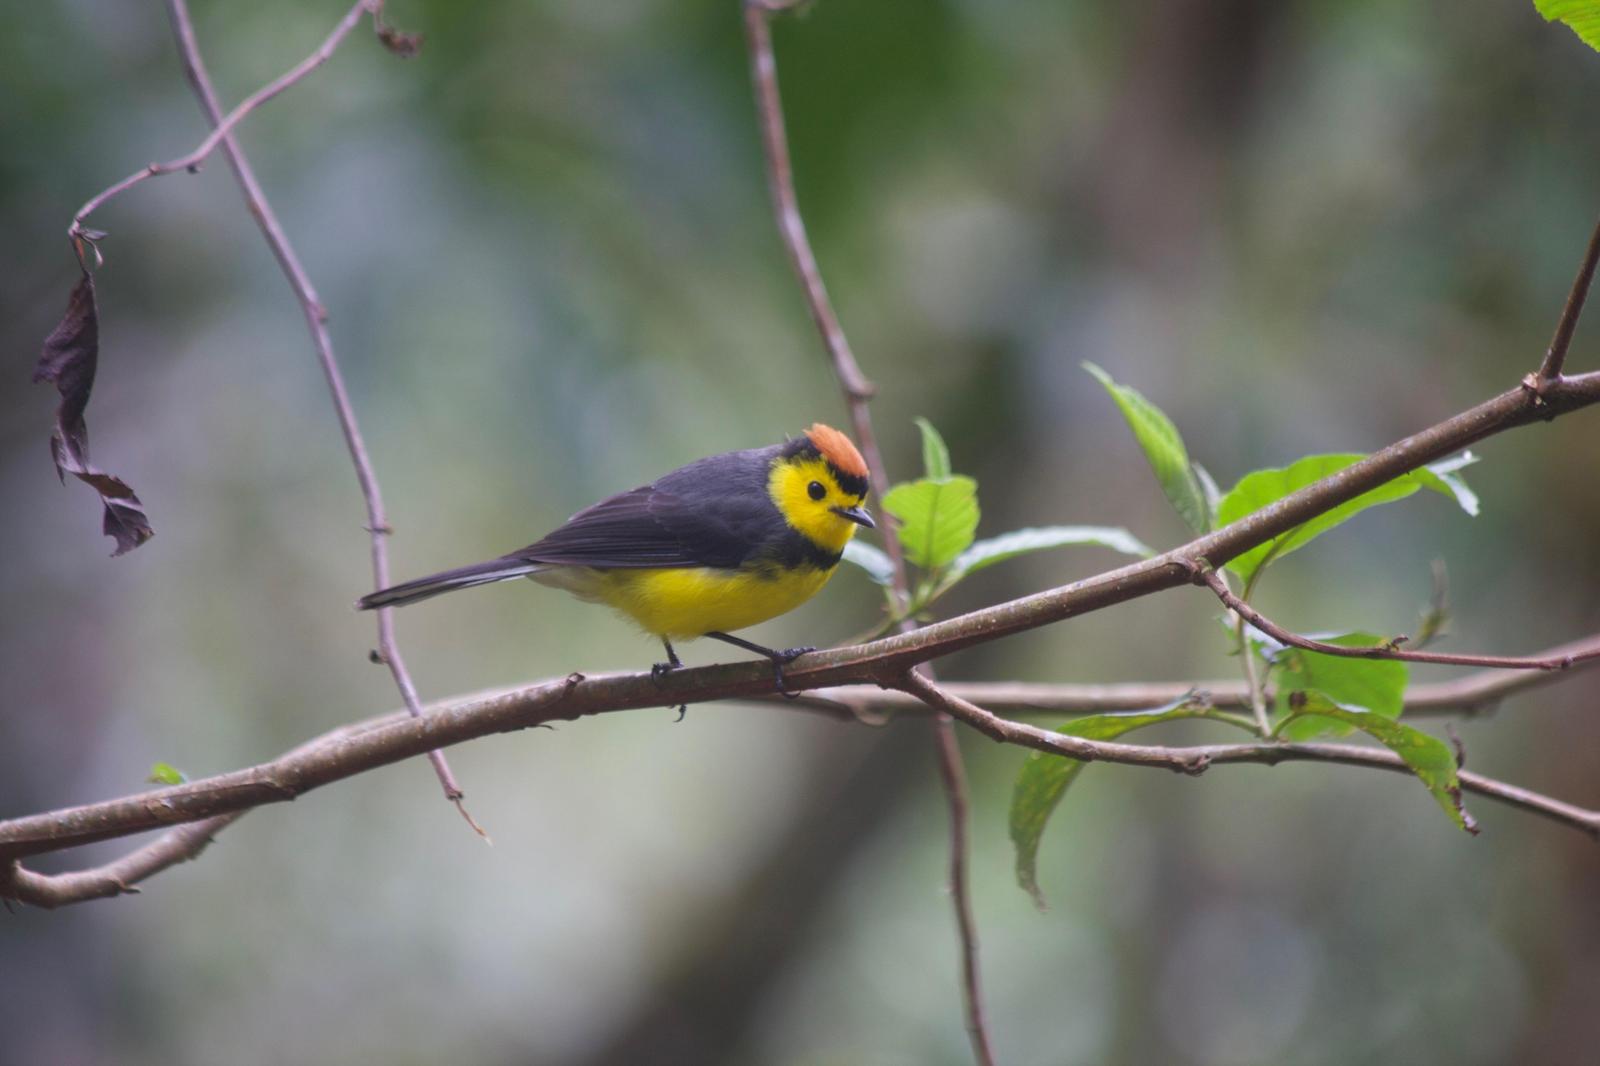 Collared Redstart Photo by Chad Apol